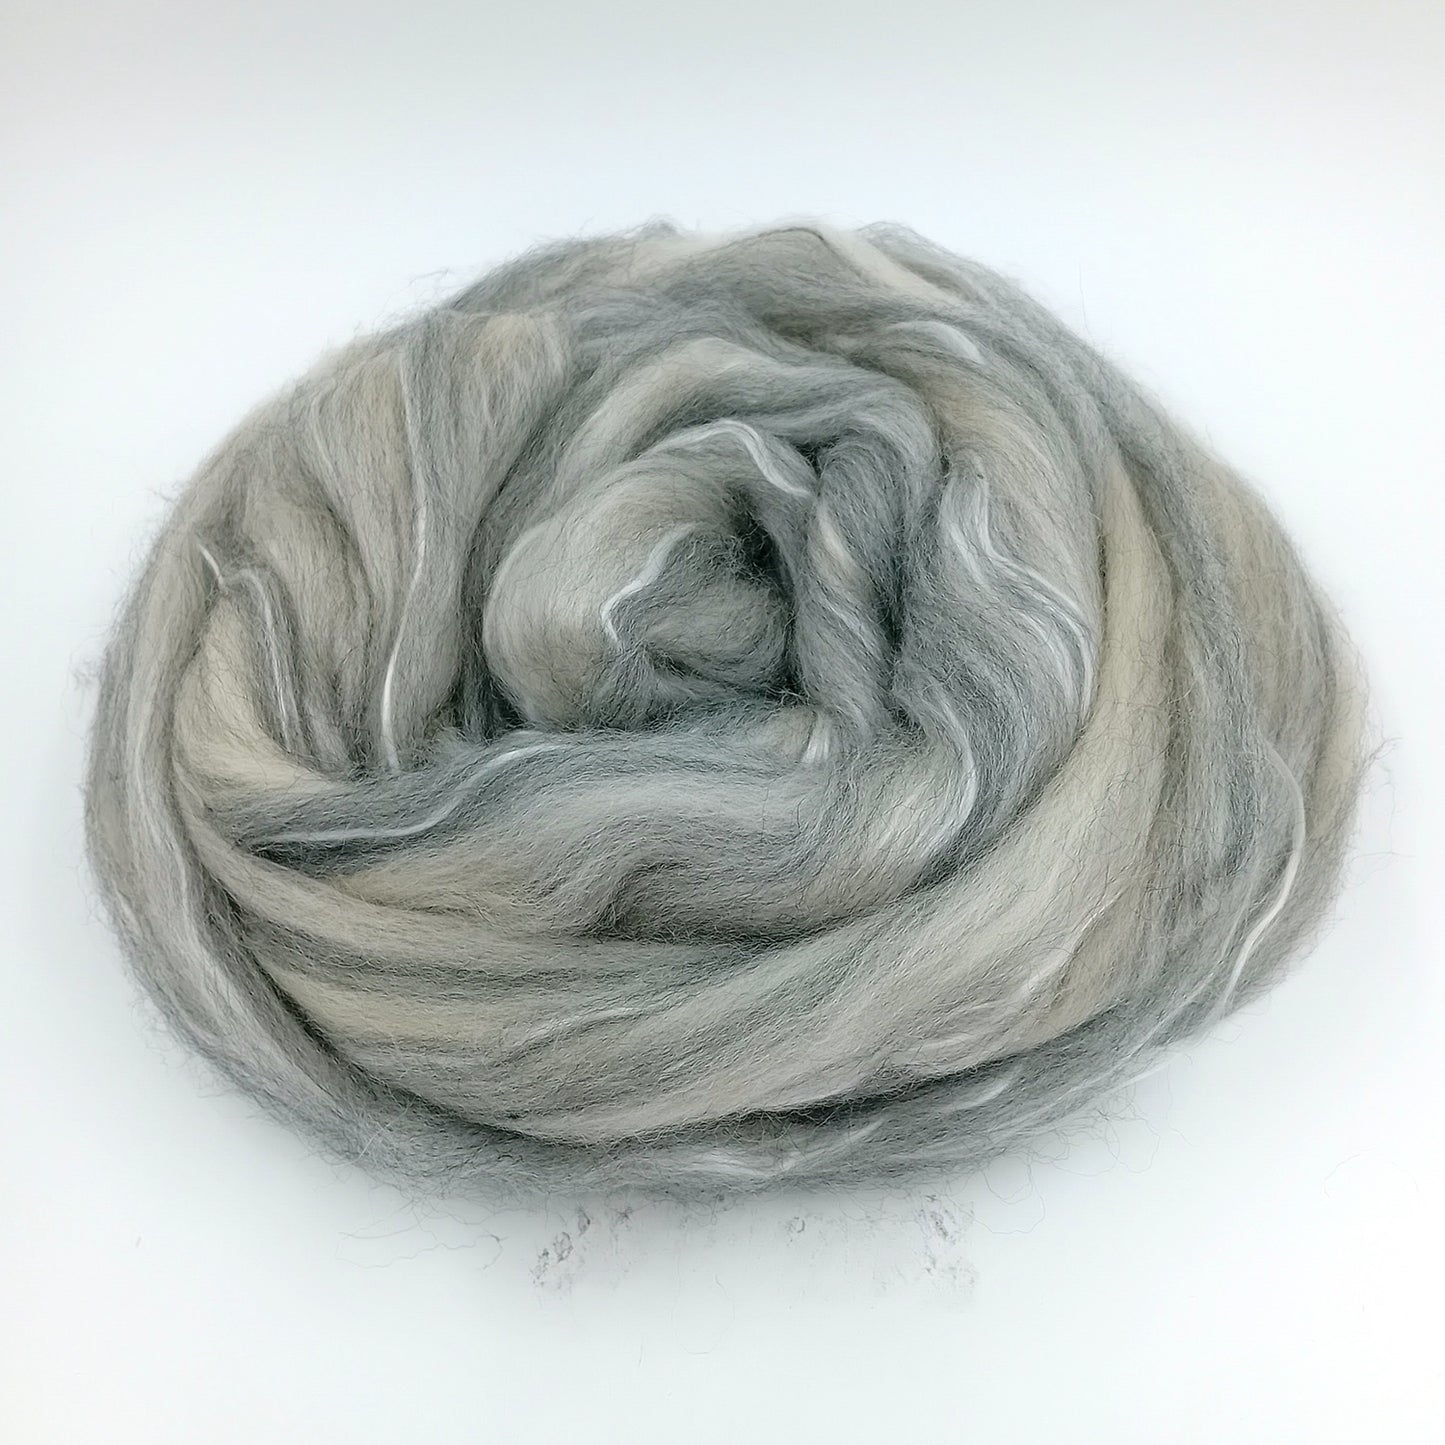 bfl wool blended with tencel fibre